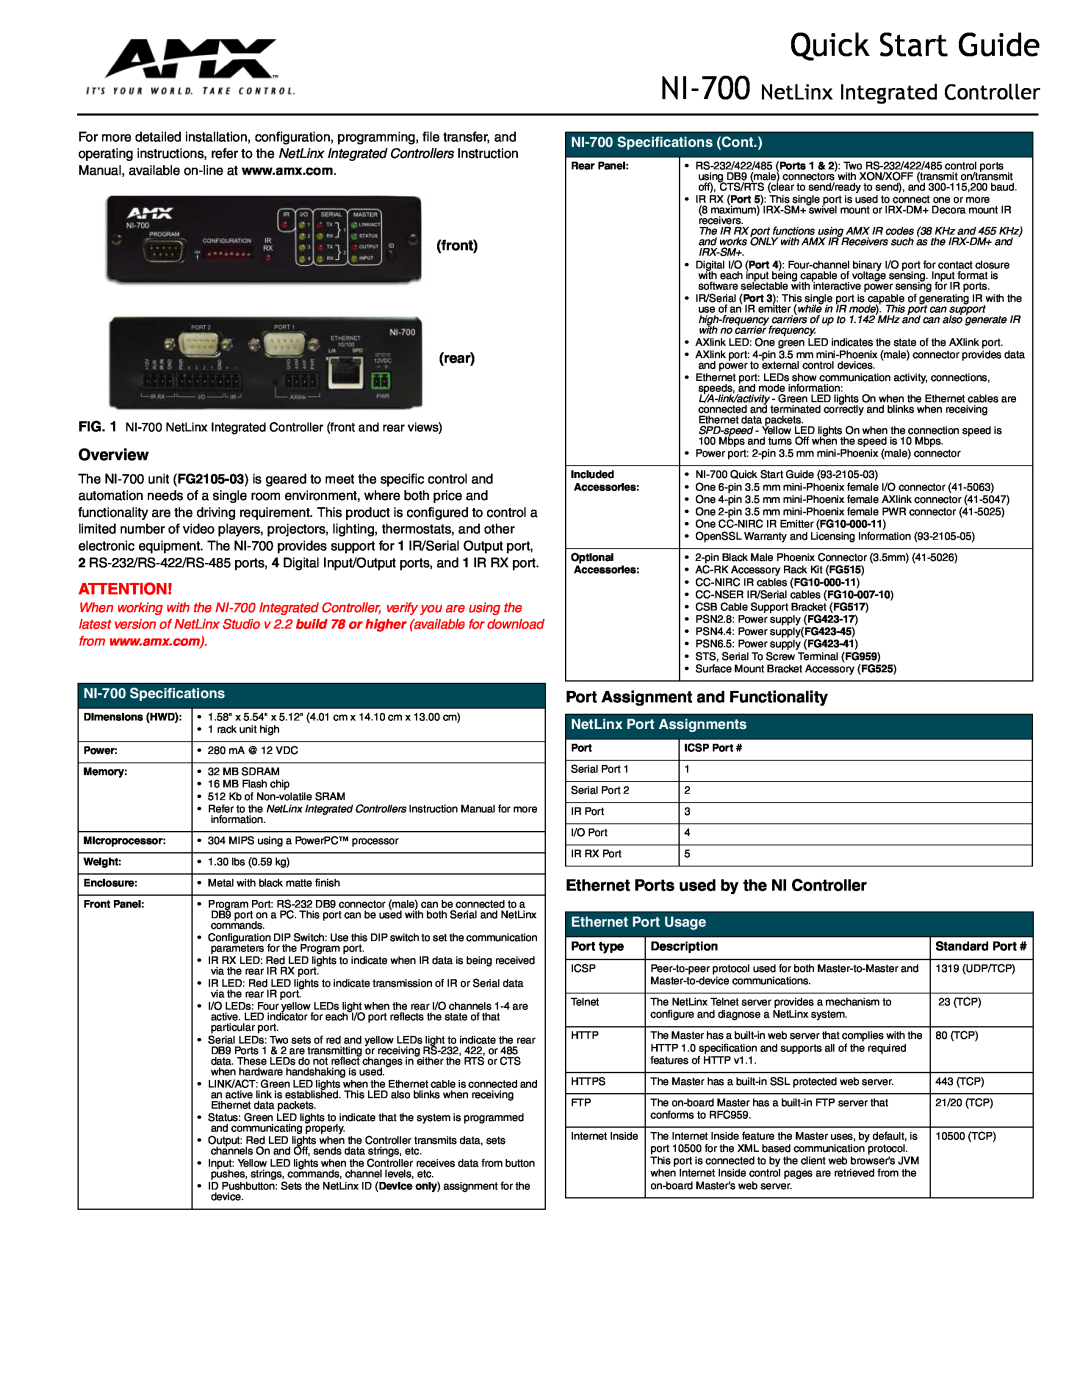 AMX NI-700 specifications Overview, Port Assignment and Functionality, Ethernet Ports used by the NI Controller 